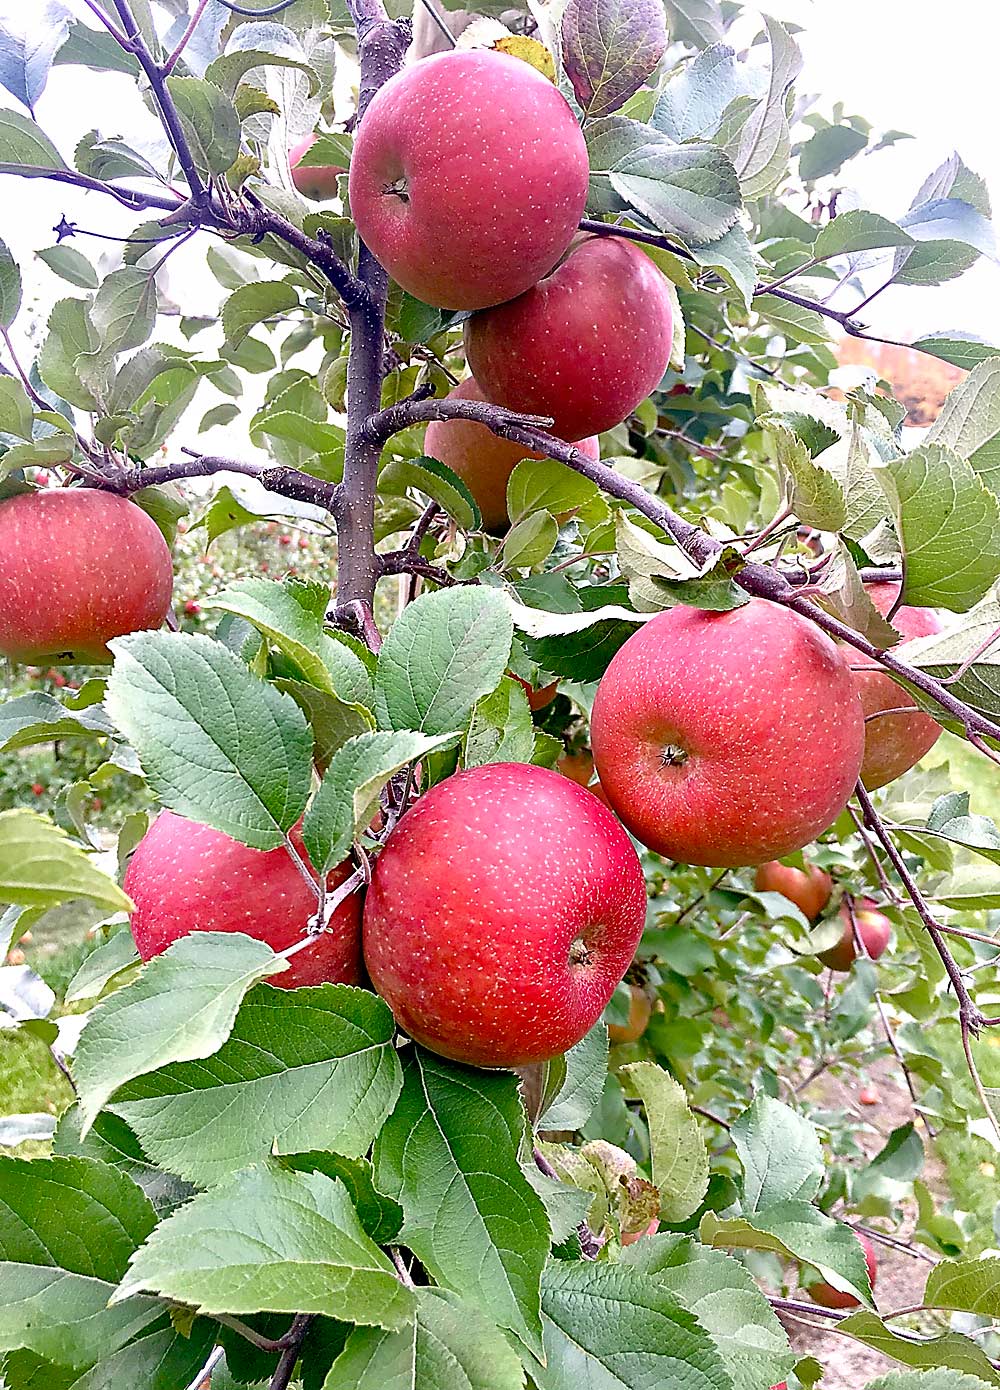 Kevin VerSnyder grows MAIA1, the apple marketed as EverCrisp, in his Northwest Michigan orchard. He decided to risk planting the late-ripening apple so far north because he was impressed with its quality. His harvest luck has been good, so far. (Courtesy Kevin VerSnyder)